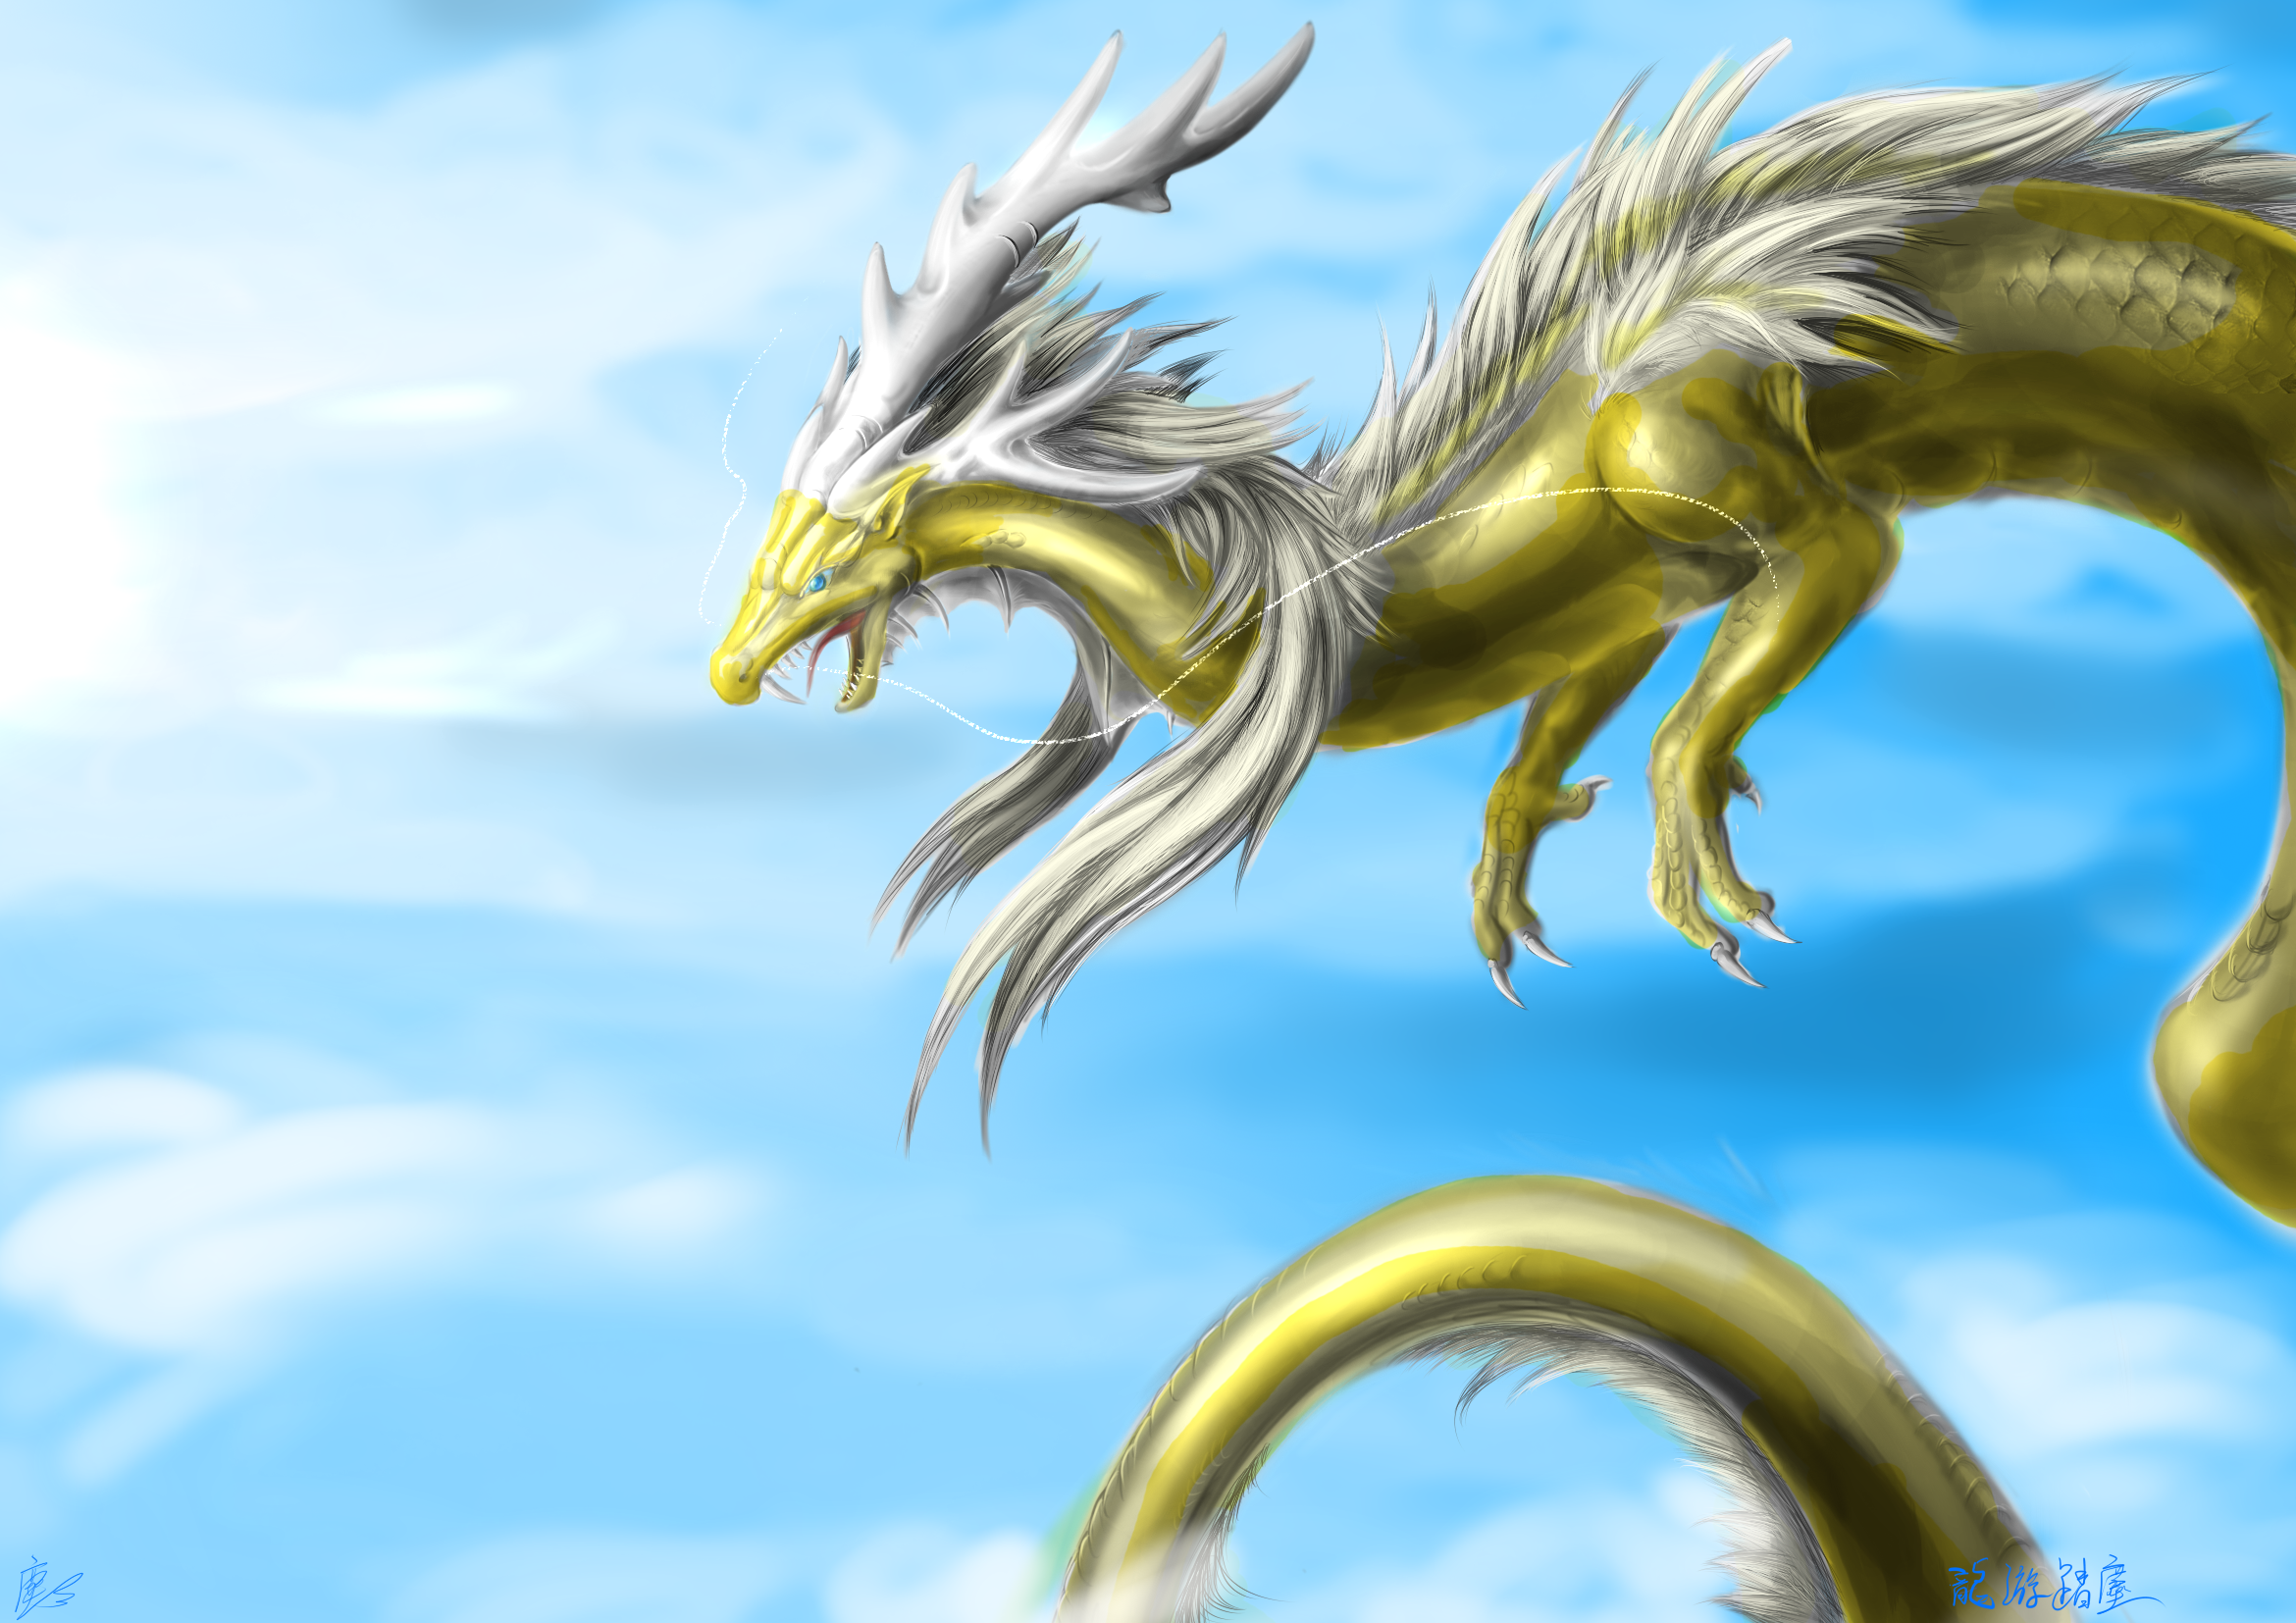 the_golden_dragon_in_sky_by_lena_lucia_dragon-d4x9ysh.png